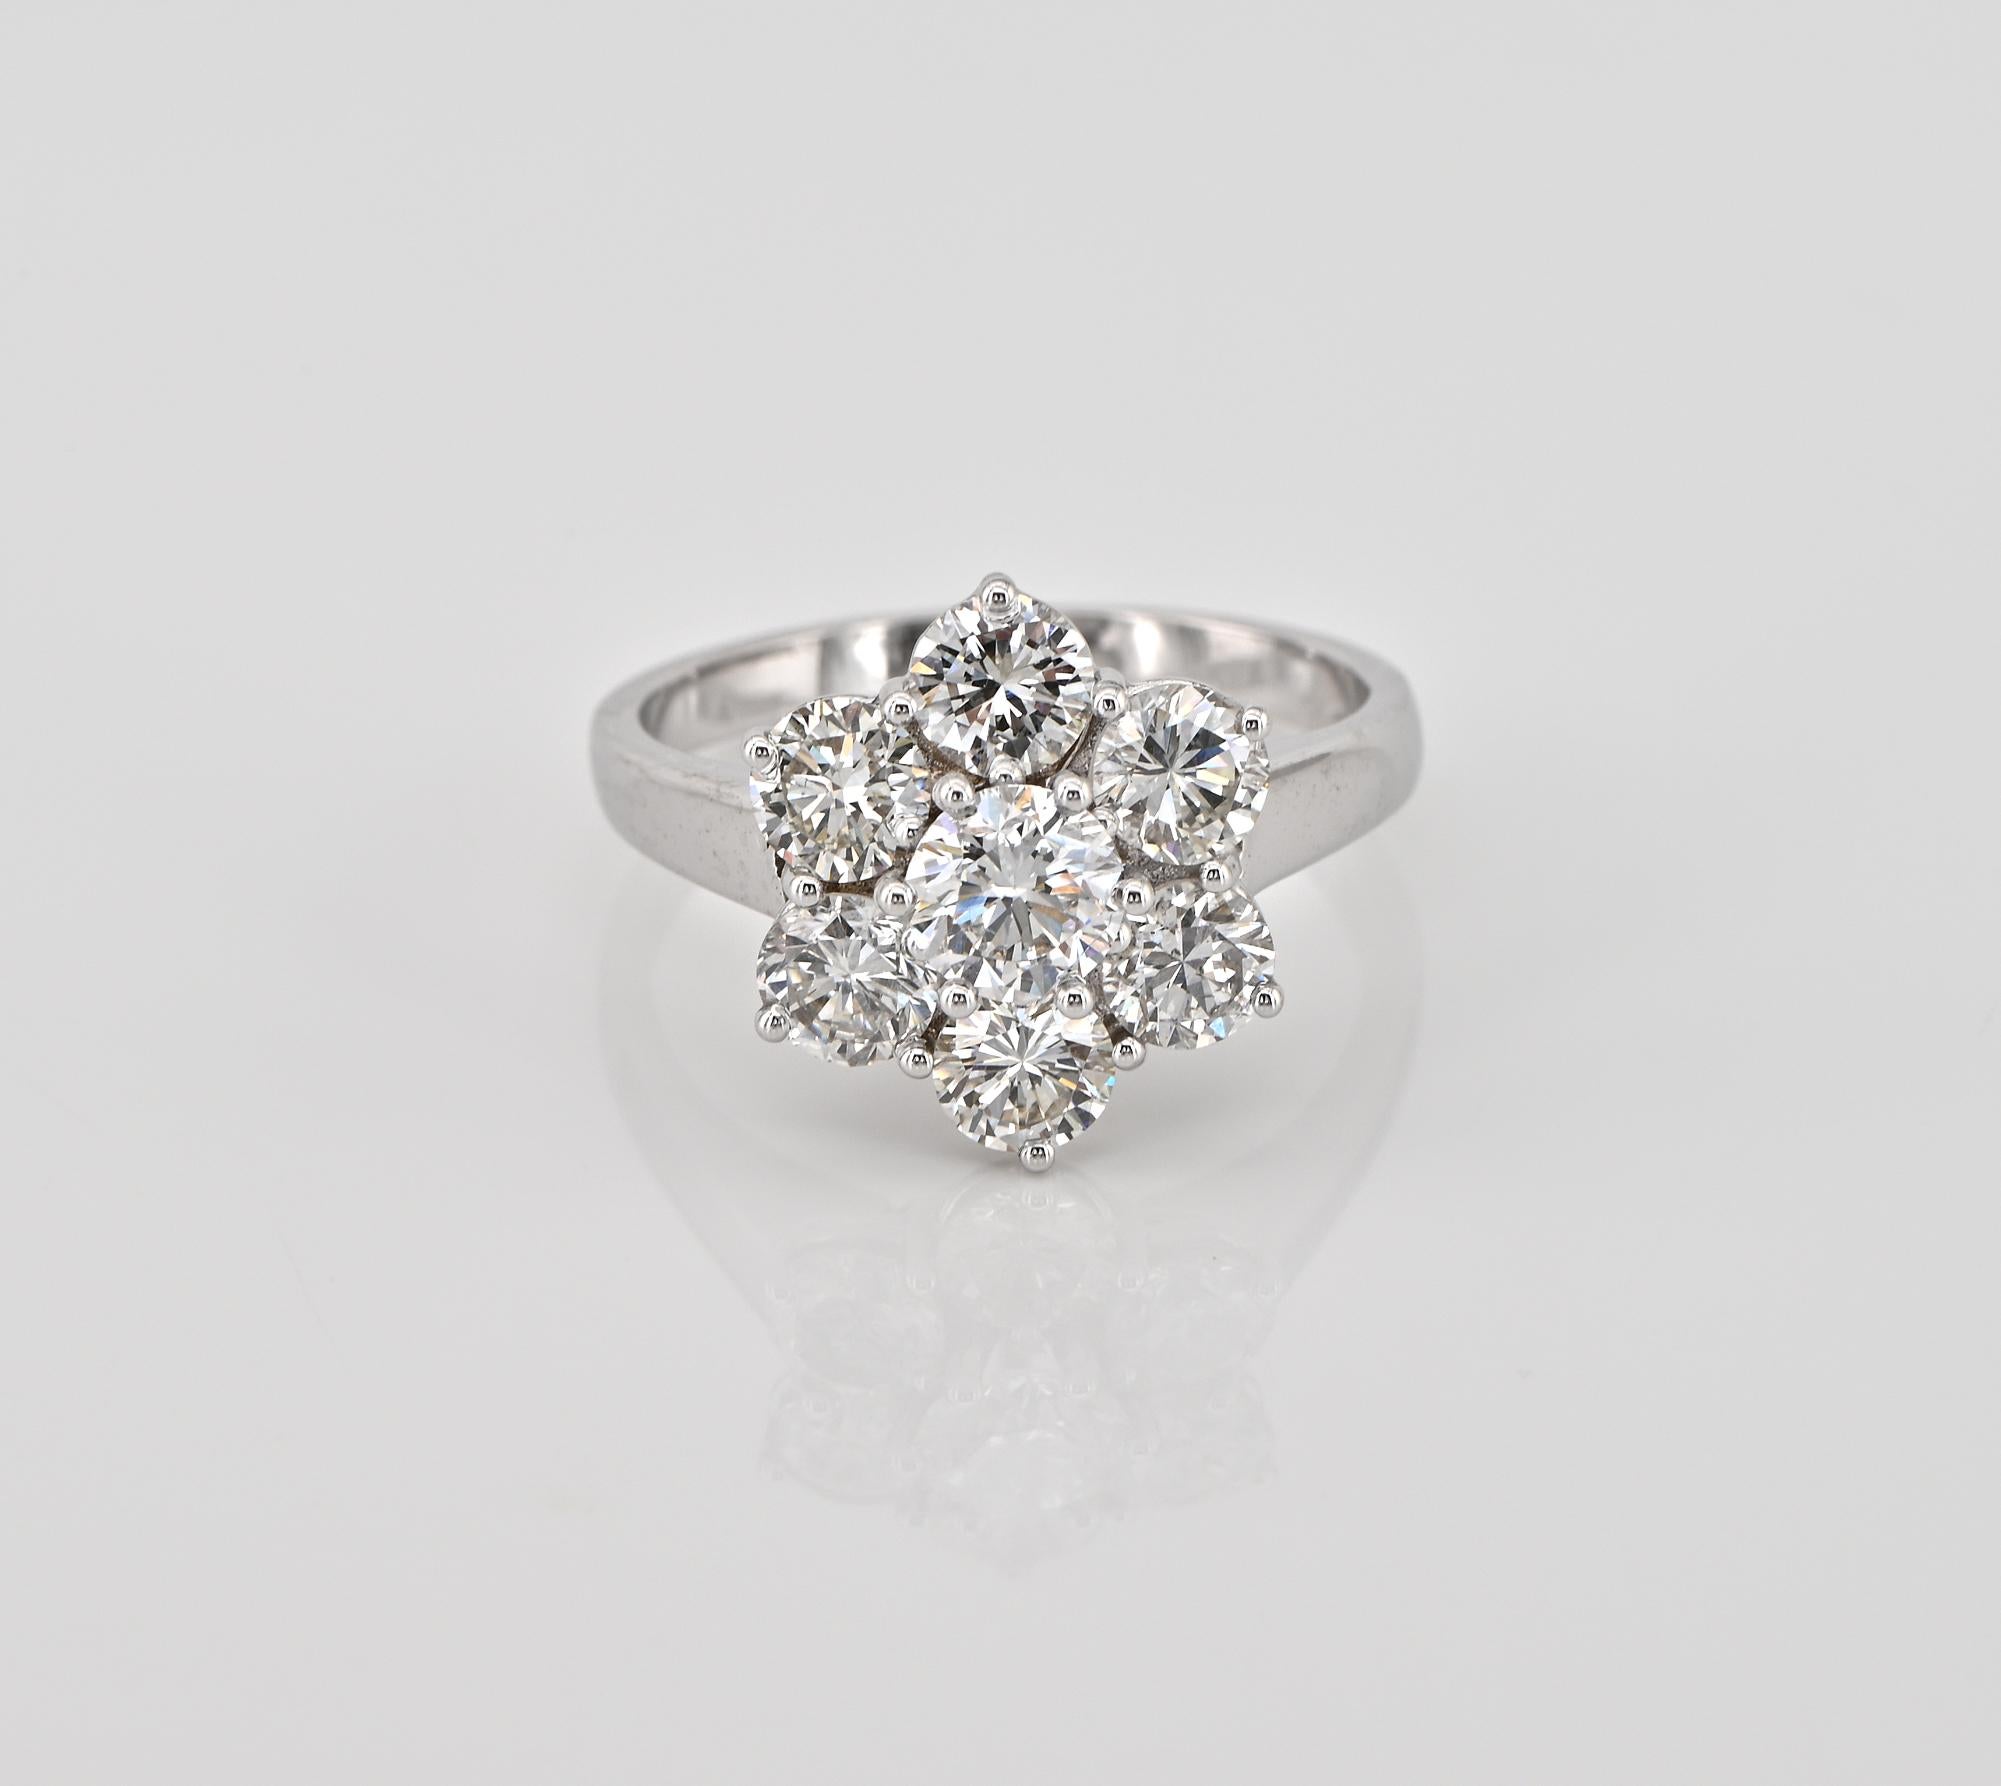 Fabulous Dazzler
This perfect estate Seven Diamond flower ring is suitable for any occasion
Hand crafted of solid 18 Kt gold, stamped
A classy cluster style shaped as a Daisy flower will be a statement for a lifetime
7 bright and glistening